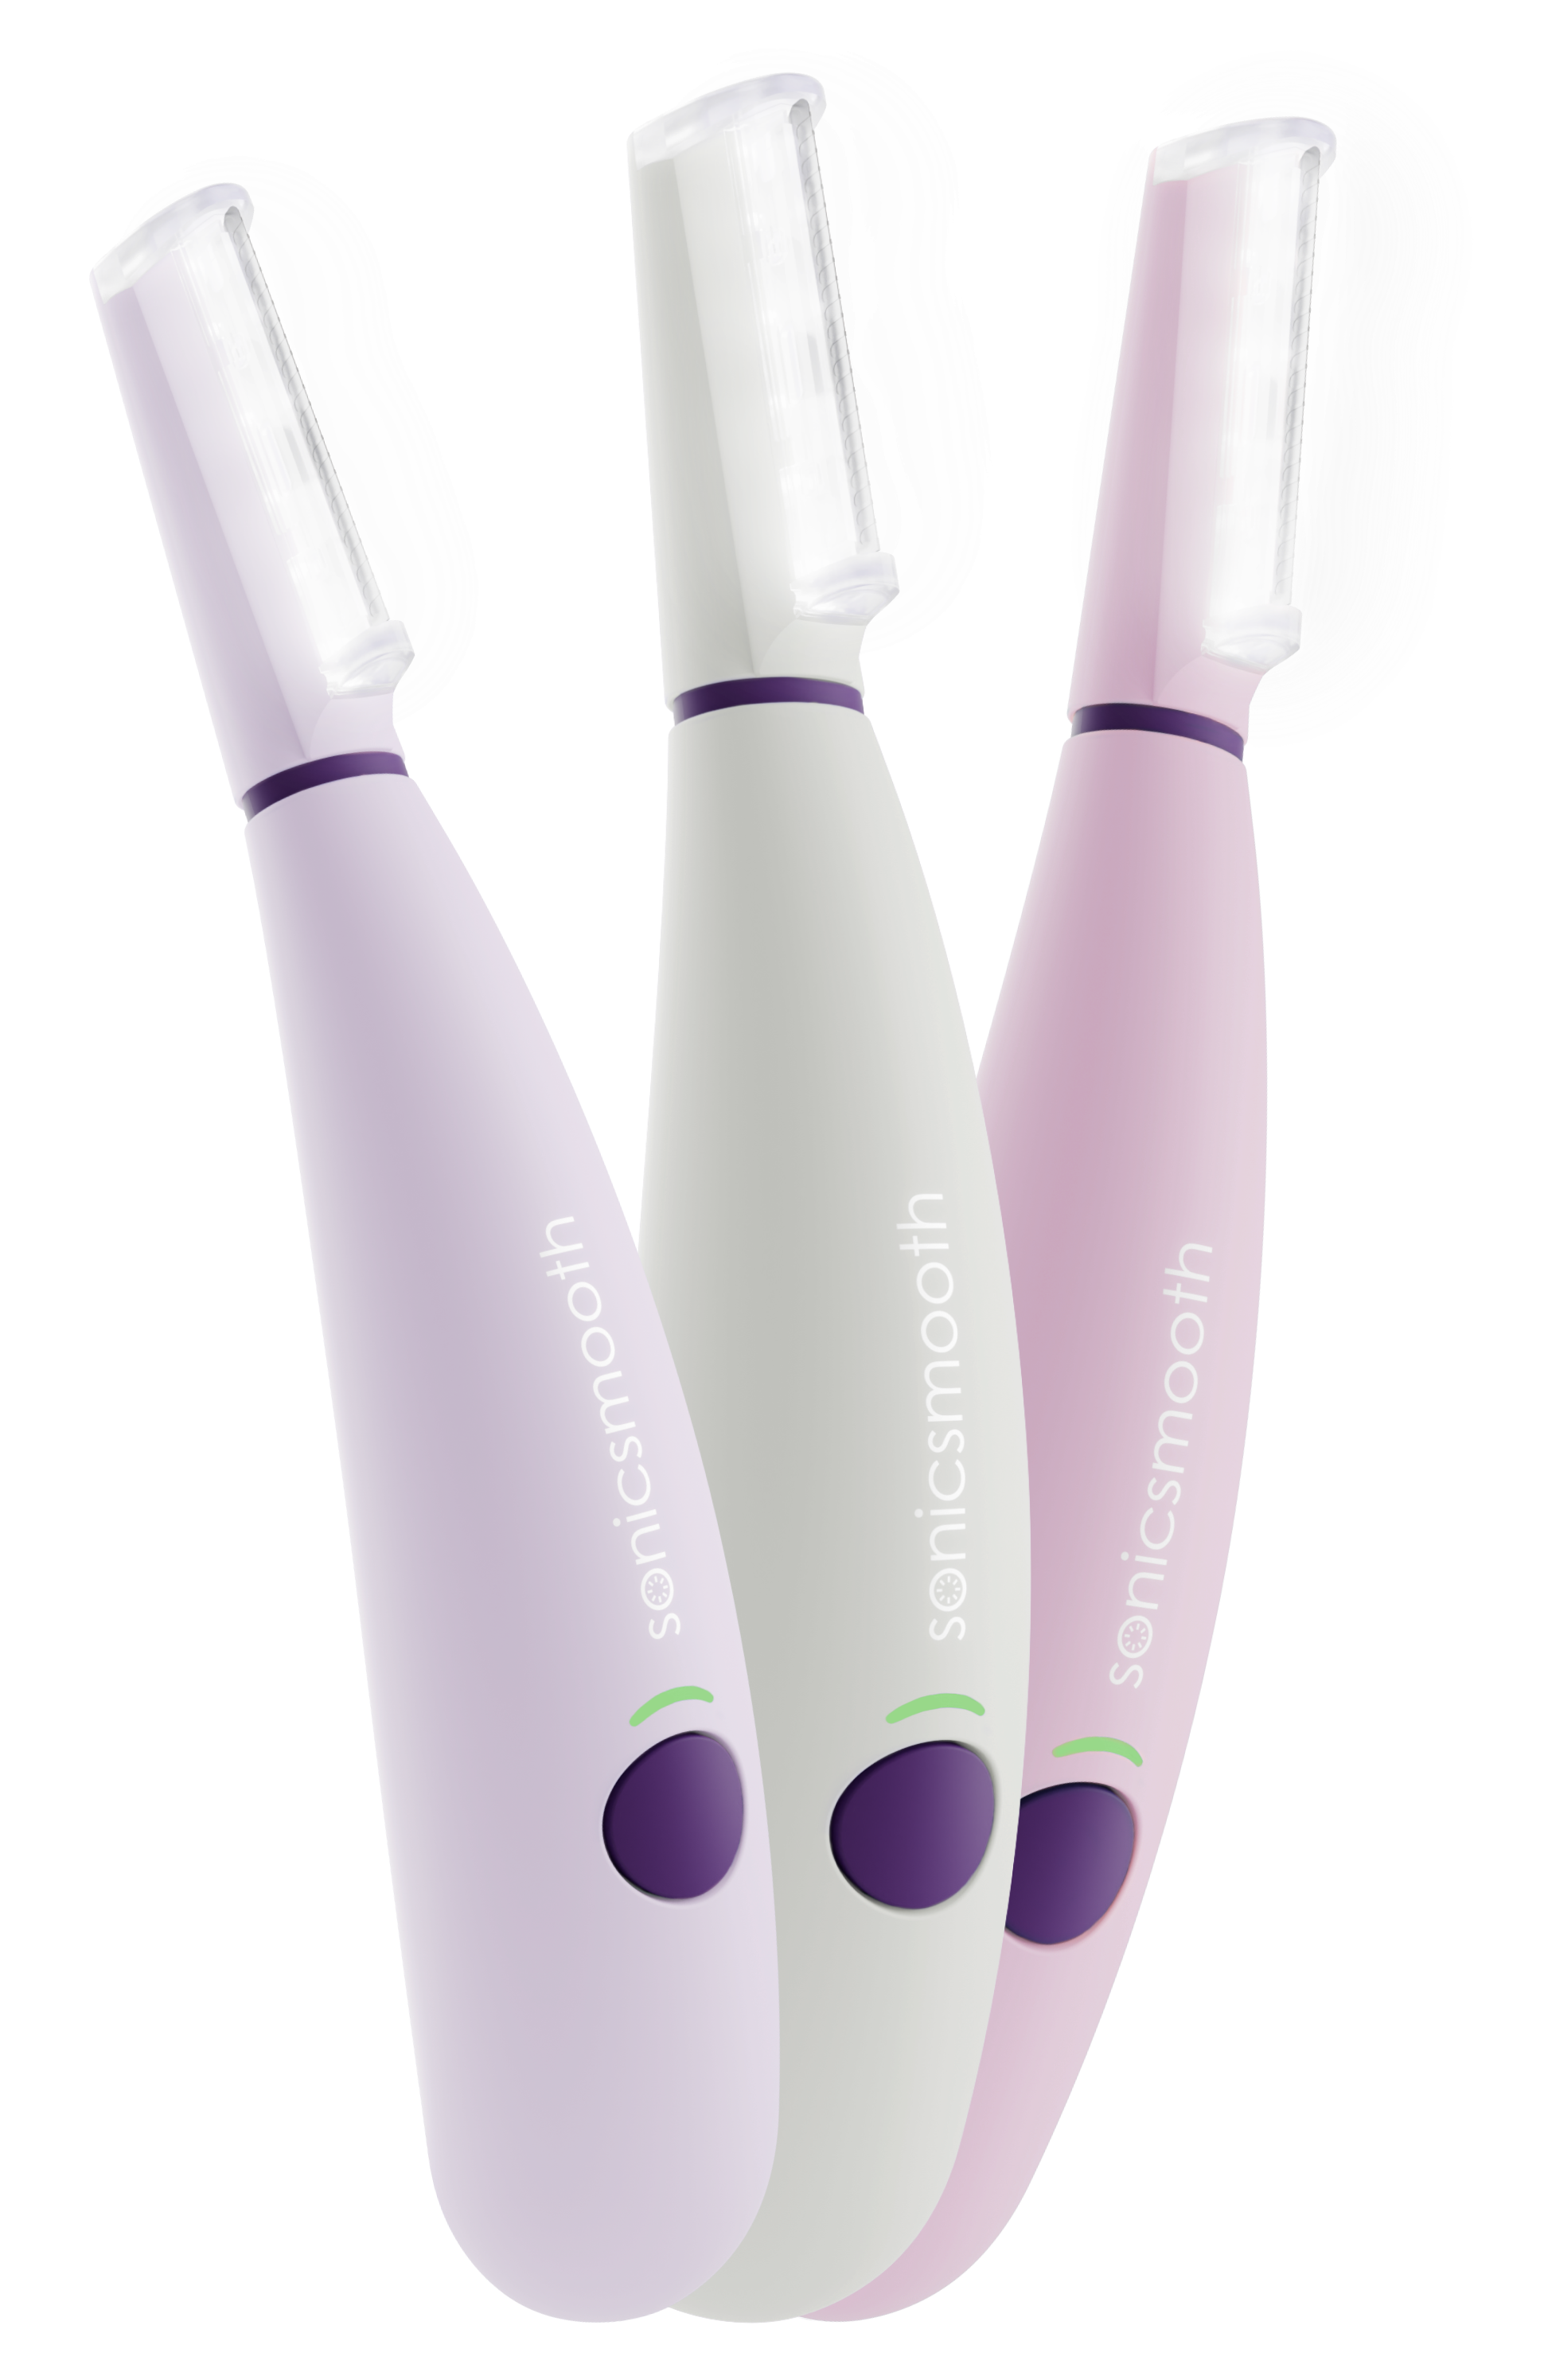 Three sonic facial cleansers in purple, gray, and pink colors.